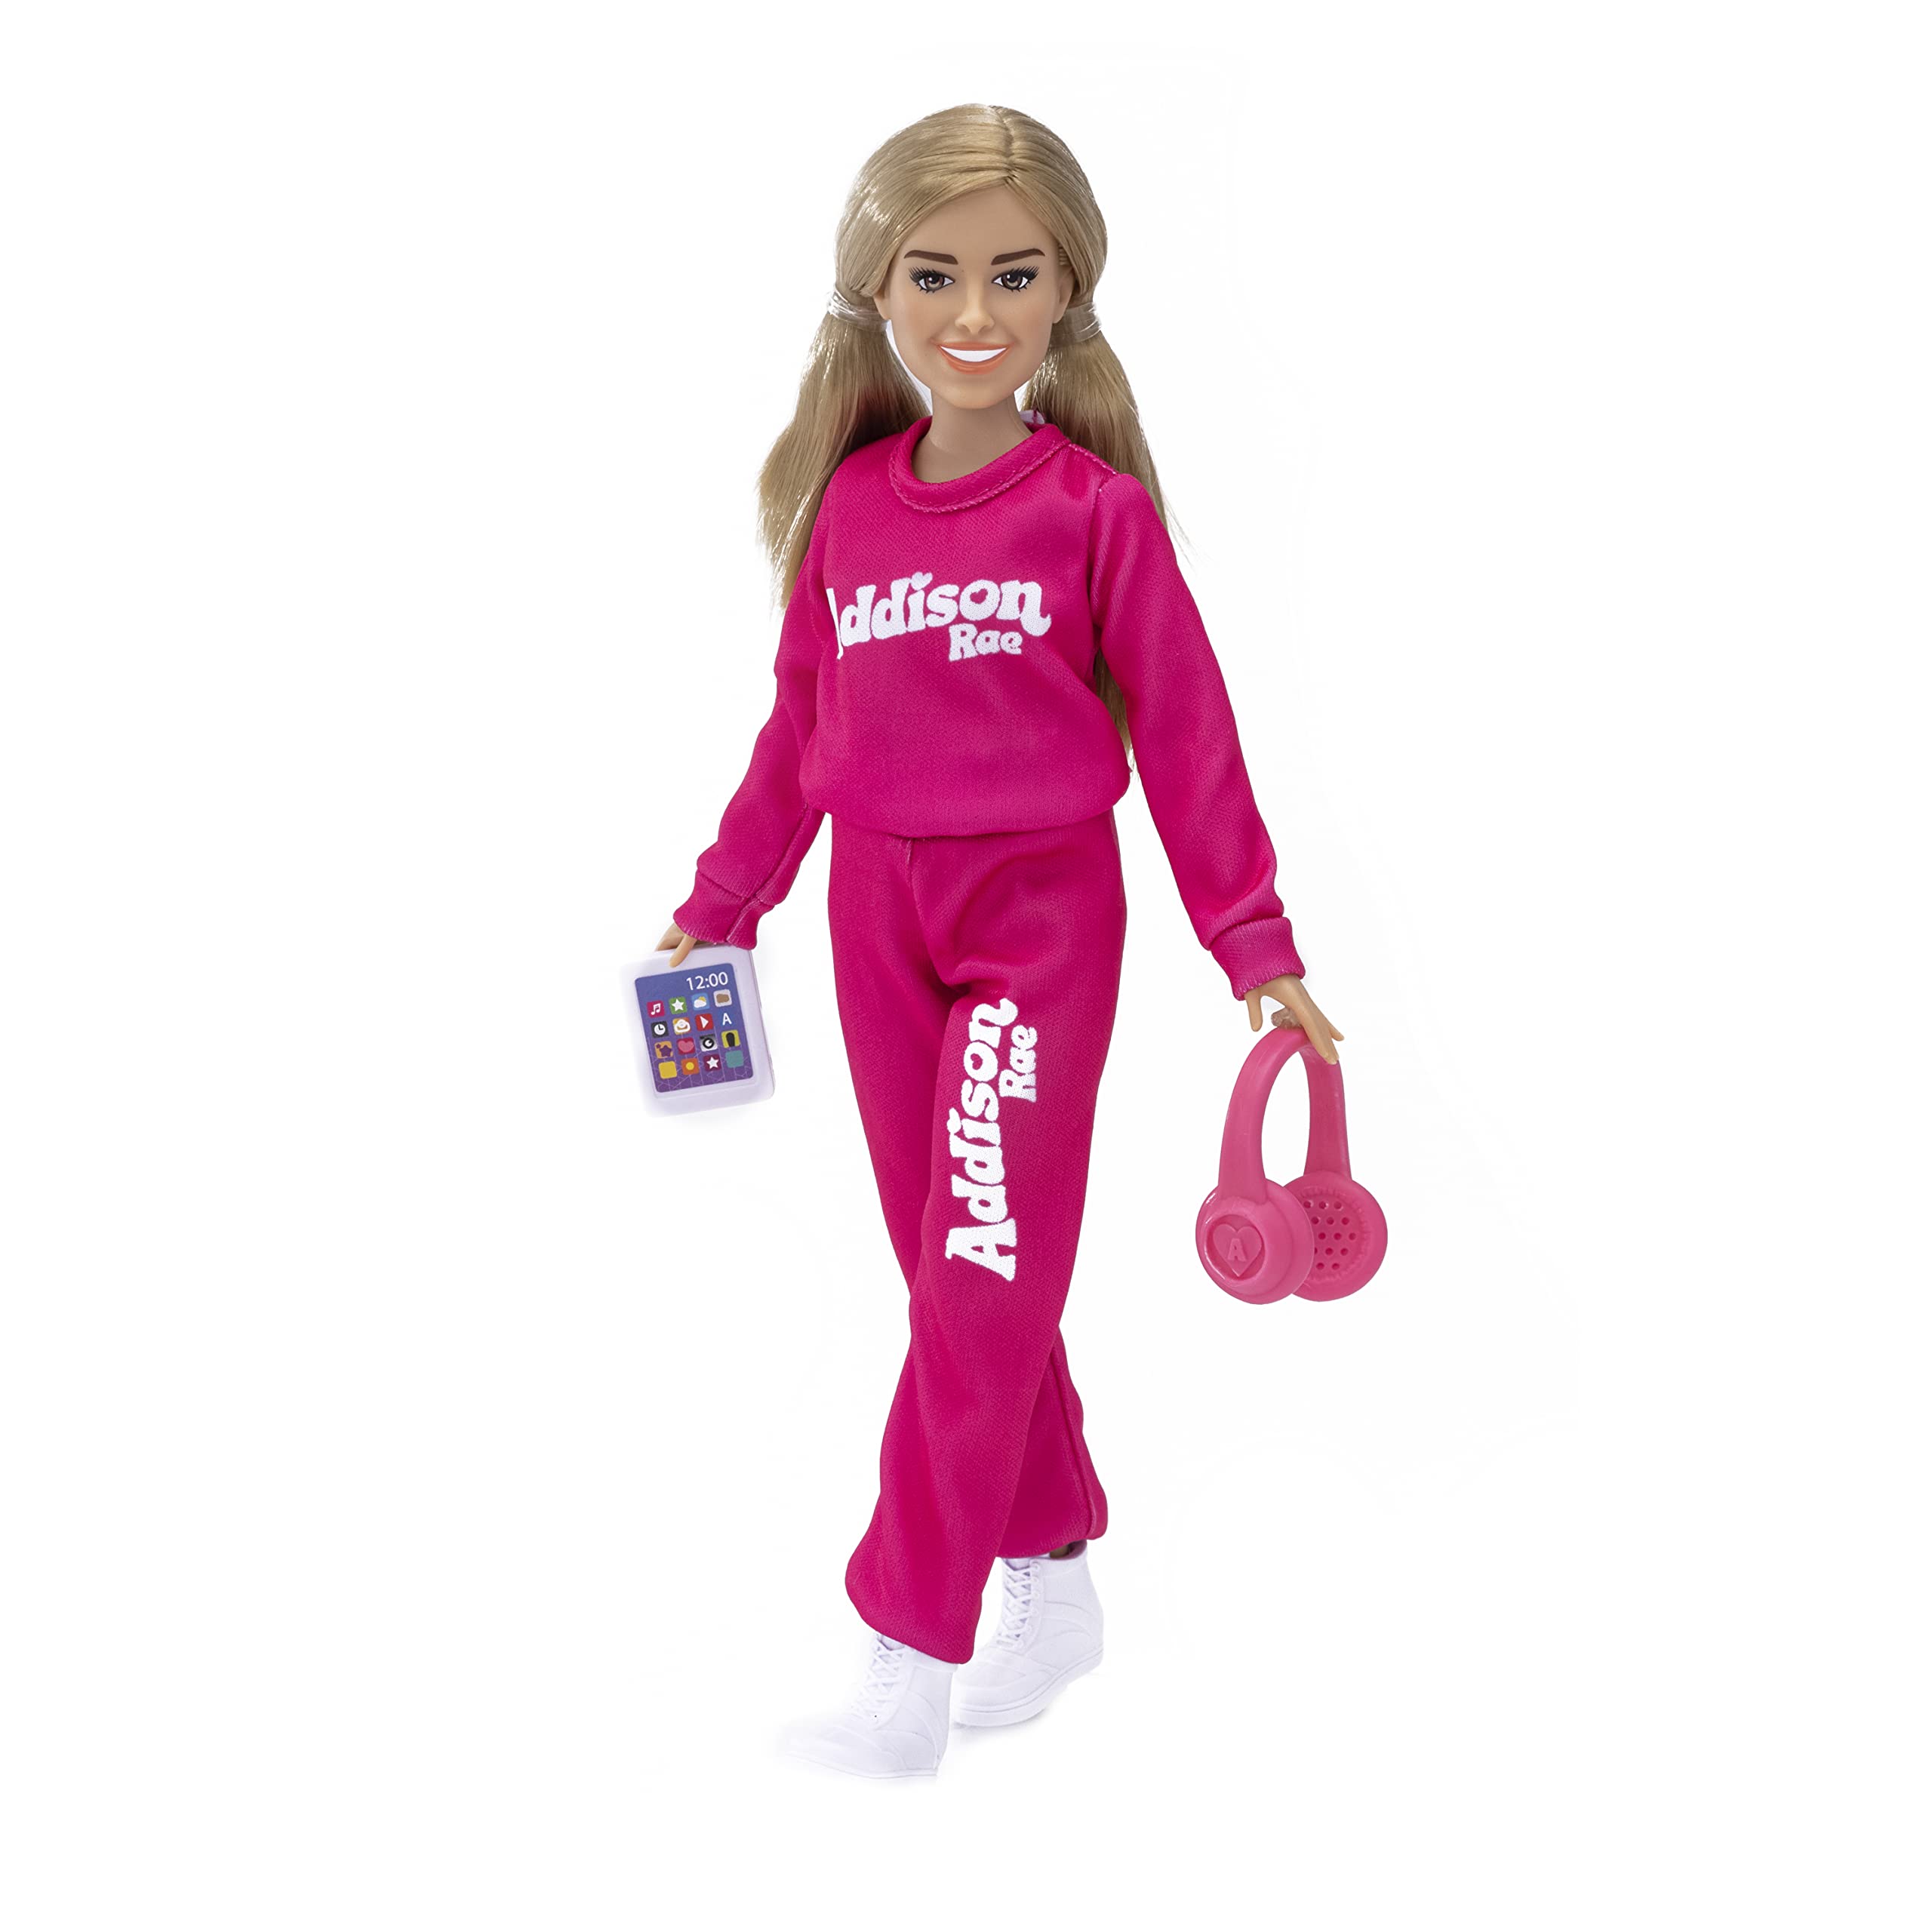 Addison Rae Fashion Doll - Comfy; Trendsetting Style; Contains 11” Doll and Accessories, Including Headphones, Tablet, and Sneakers